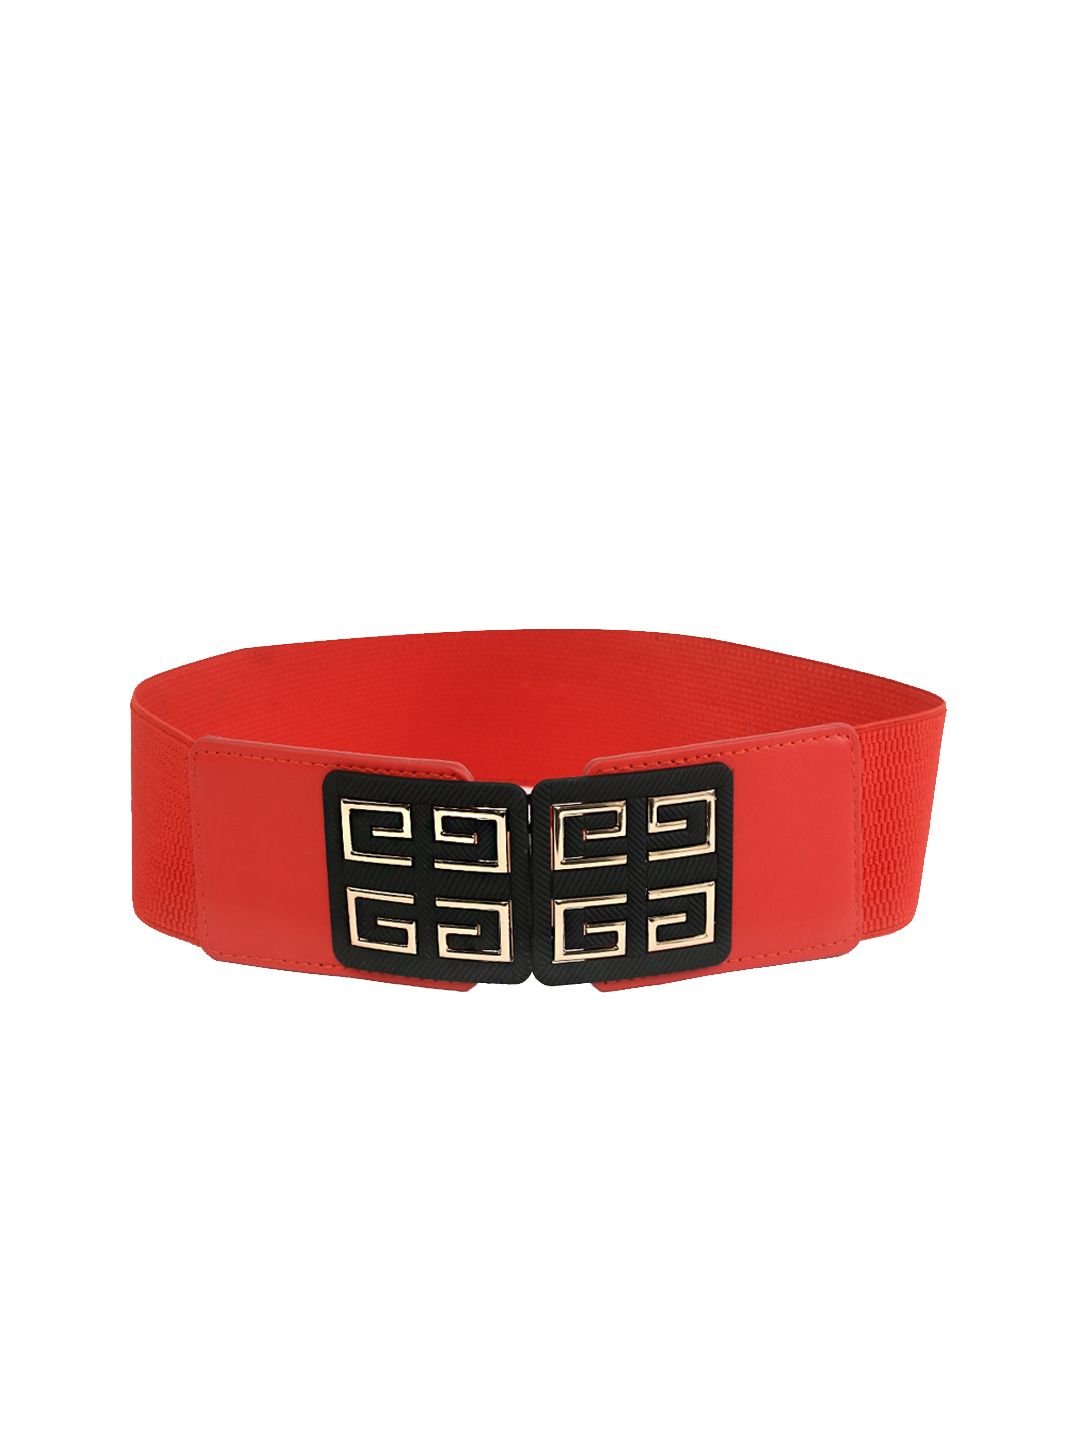 Kastner Women Red Stretchable Canvas Belt Price in India